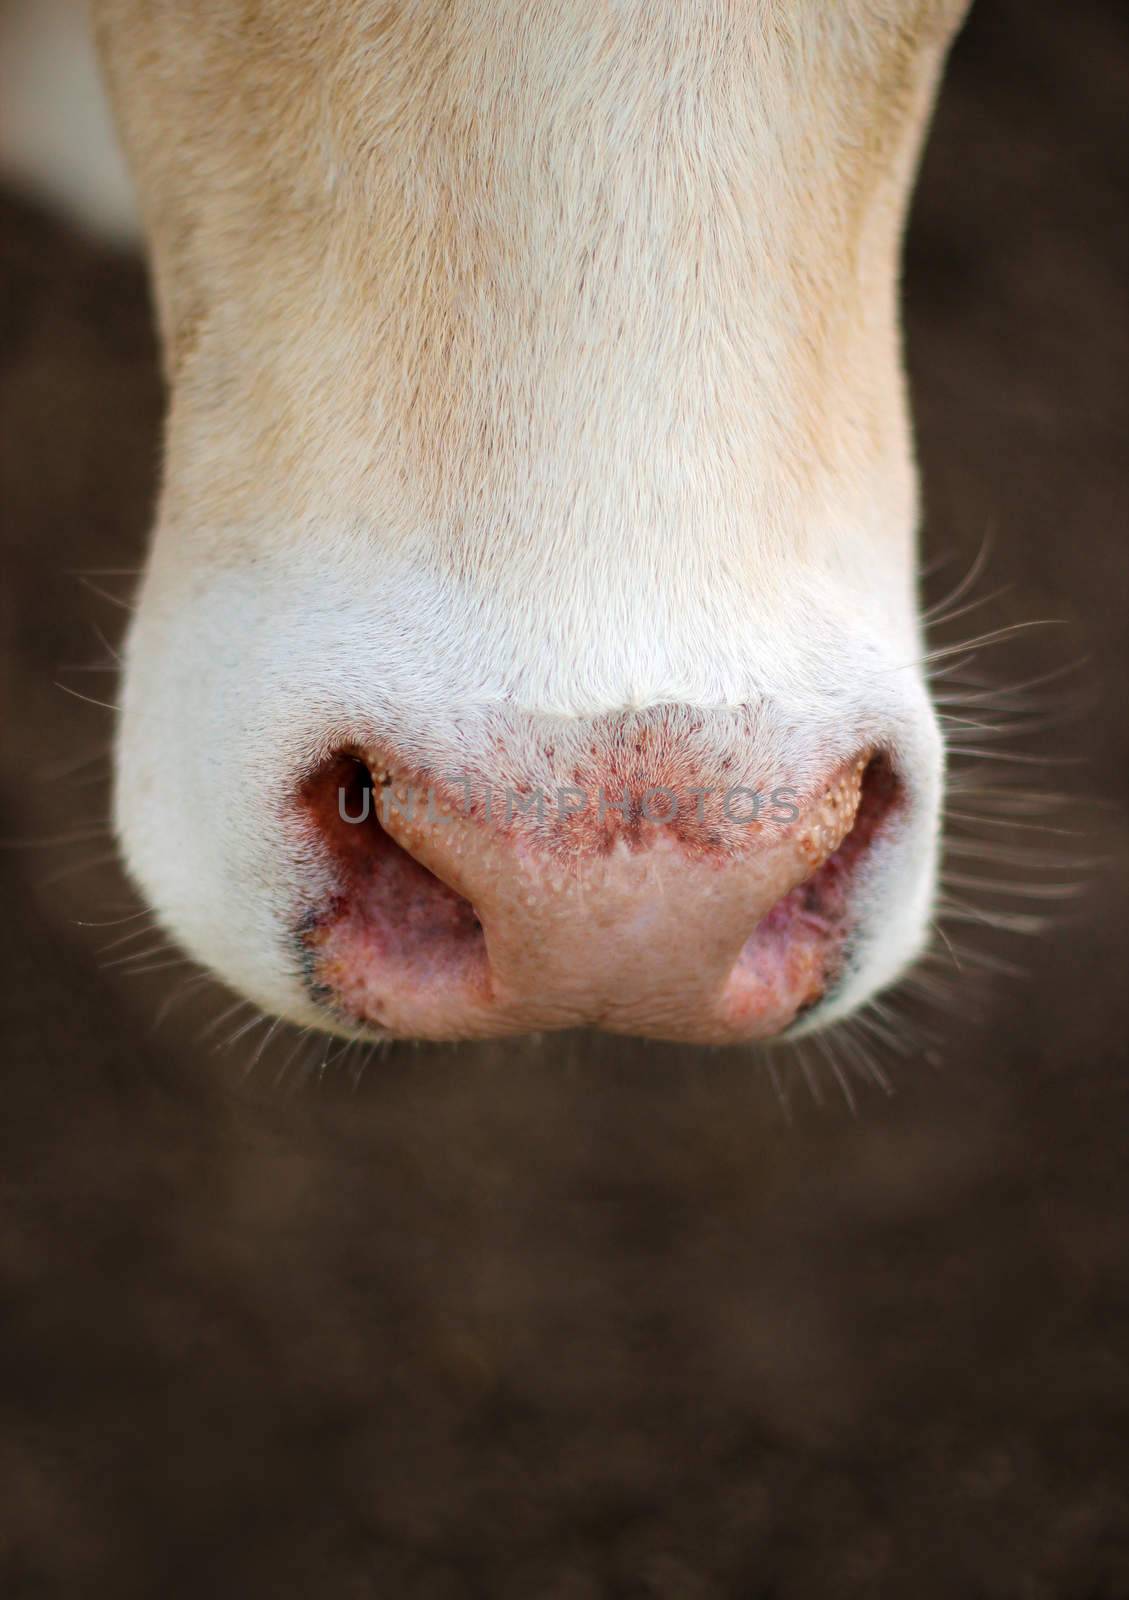 Cow nose close up on the nose sweat.